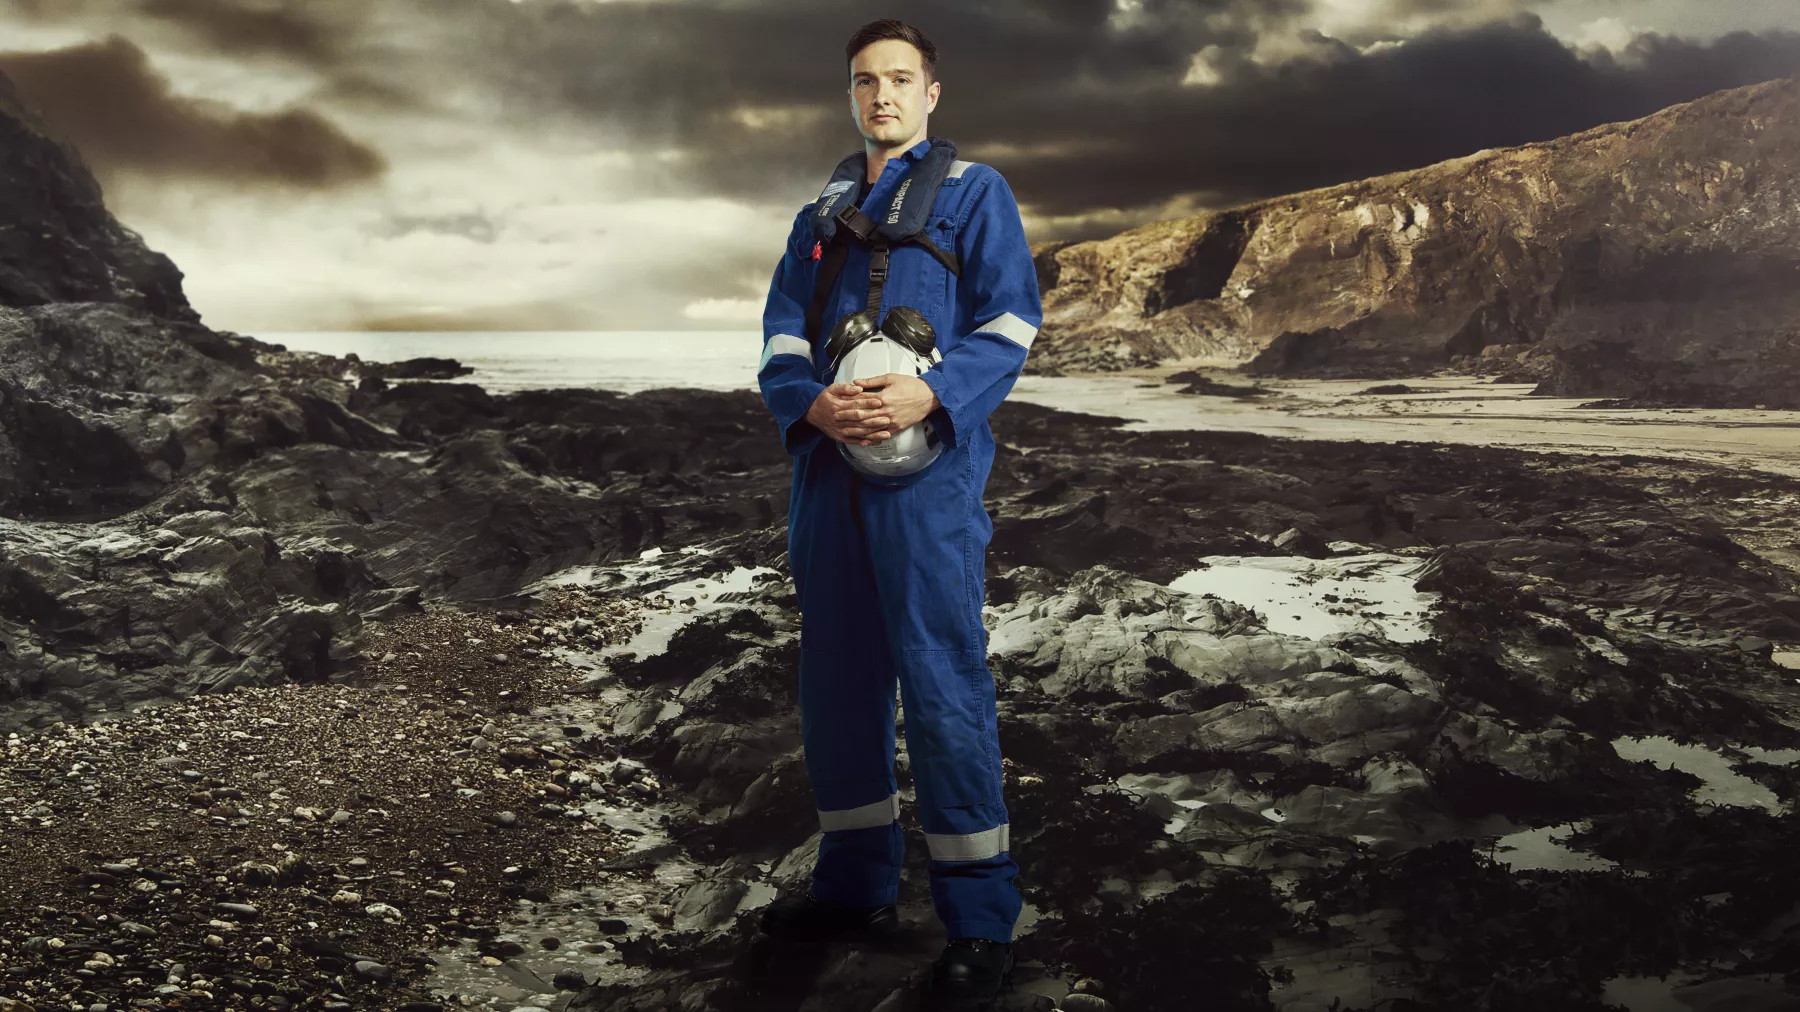 Man in blue coveralls stood on rocky, stormy landscape with white helmet in hands